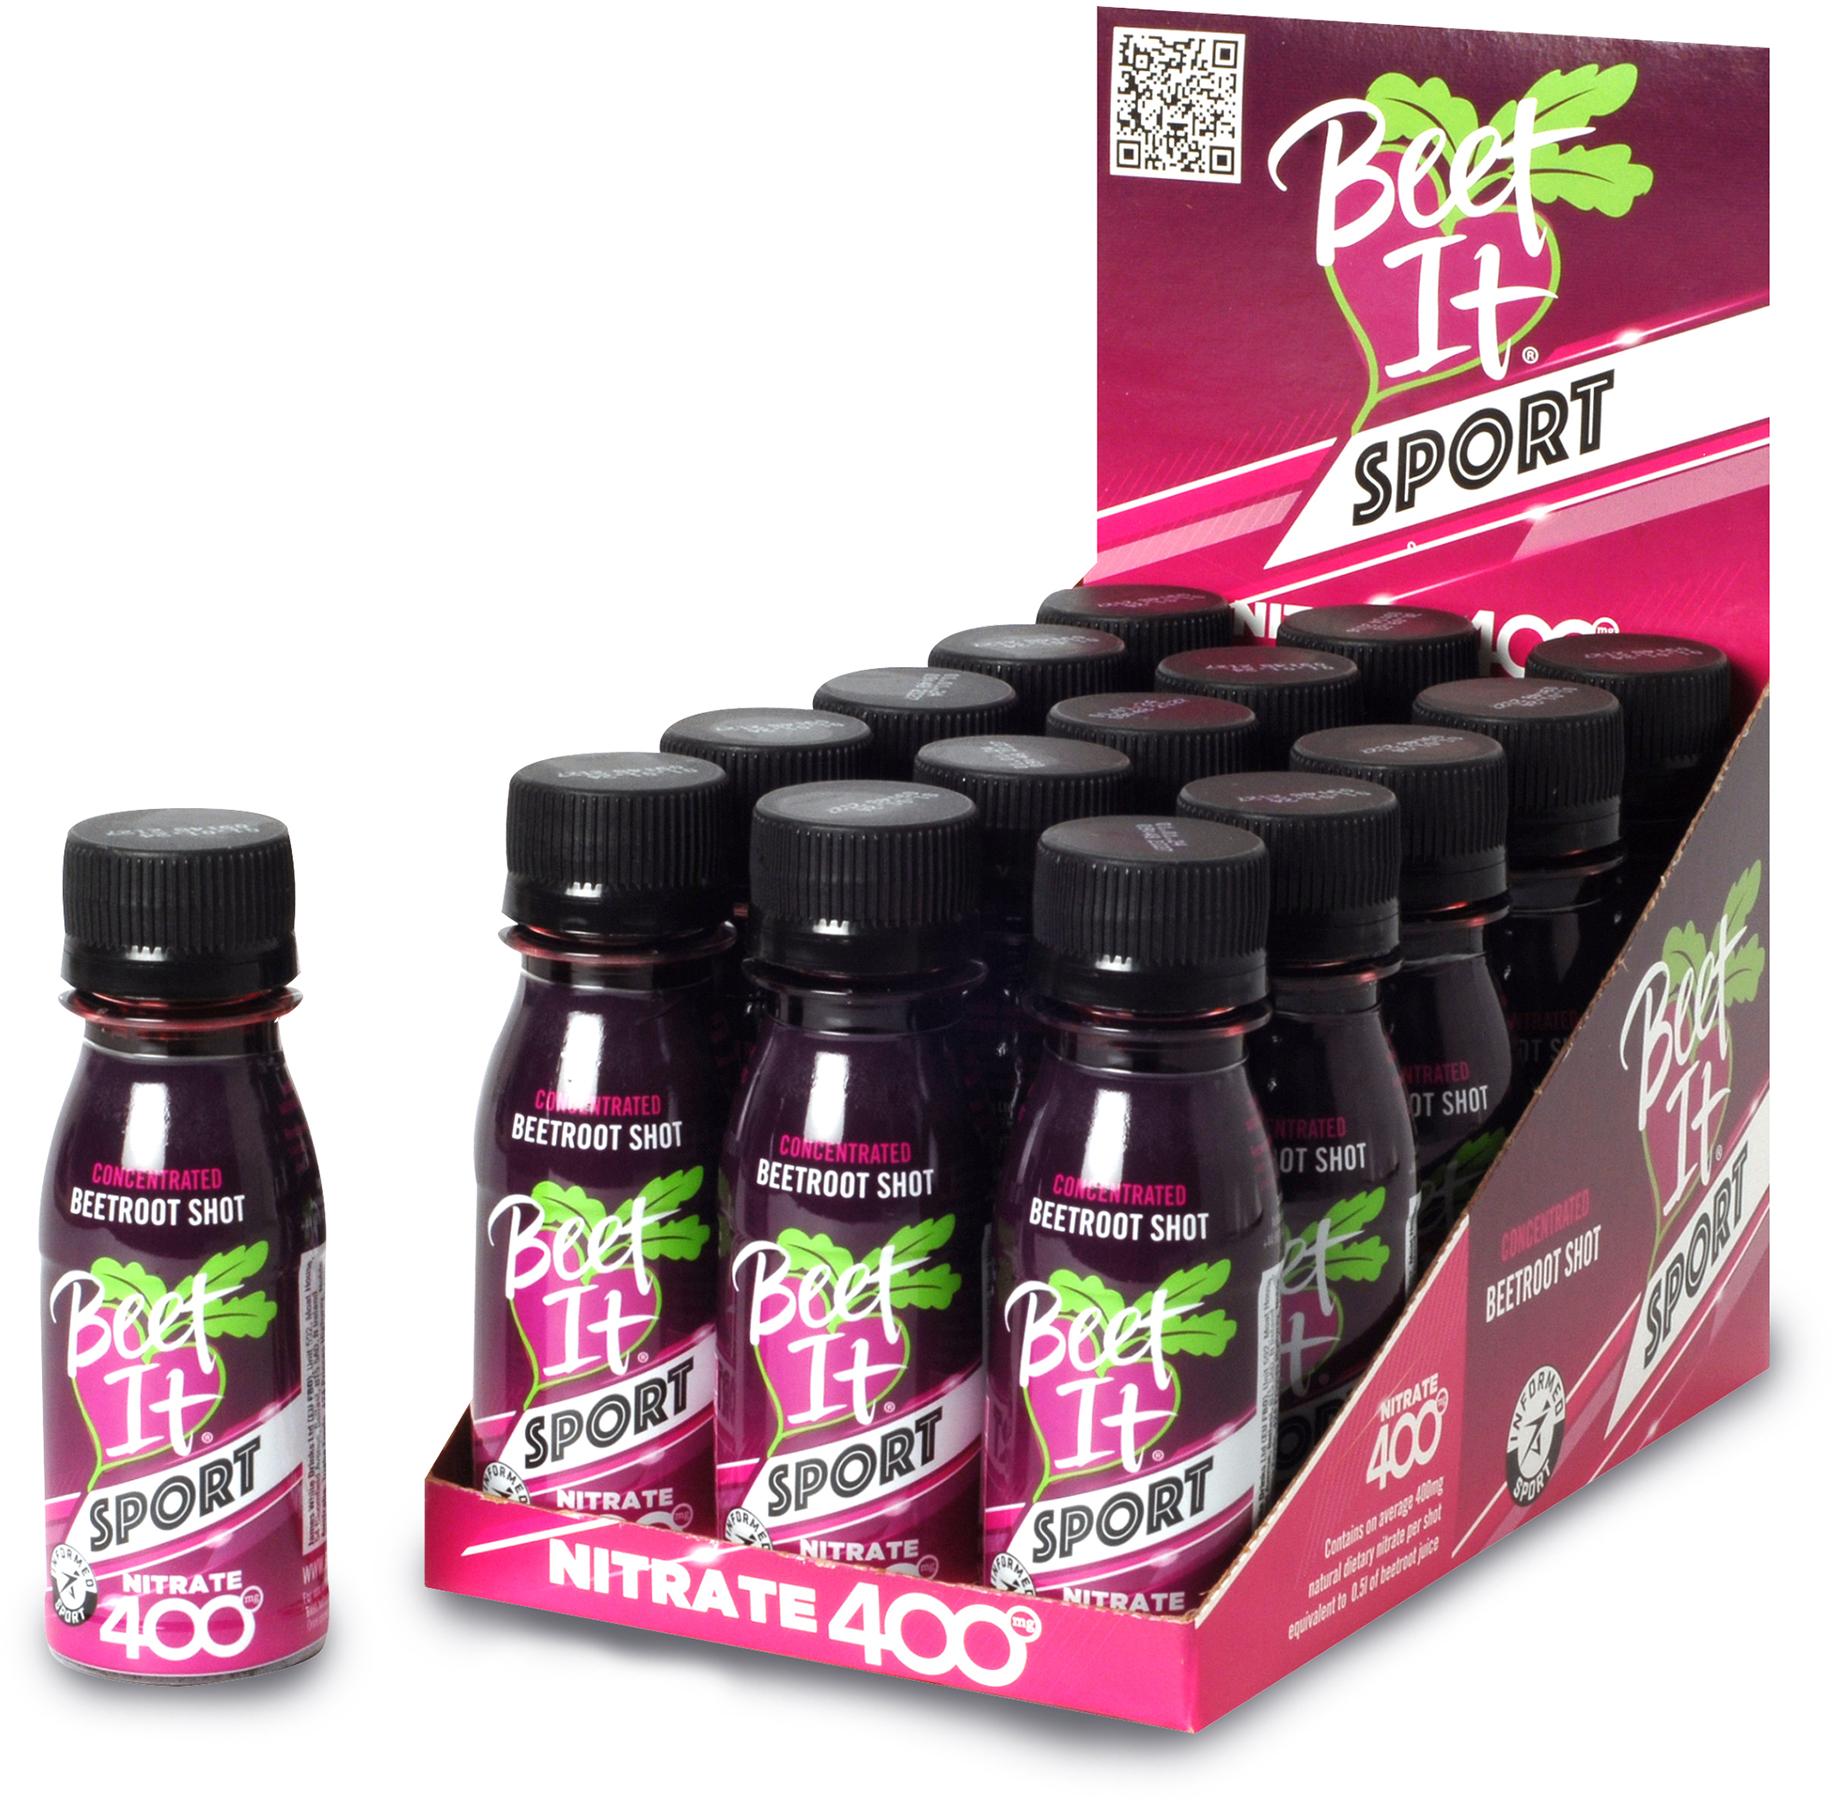 Beet It Nitrate 400 Concentrated Beetroot Shot (15 X 70ml)